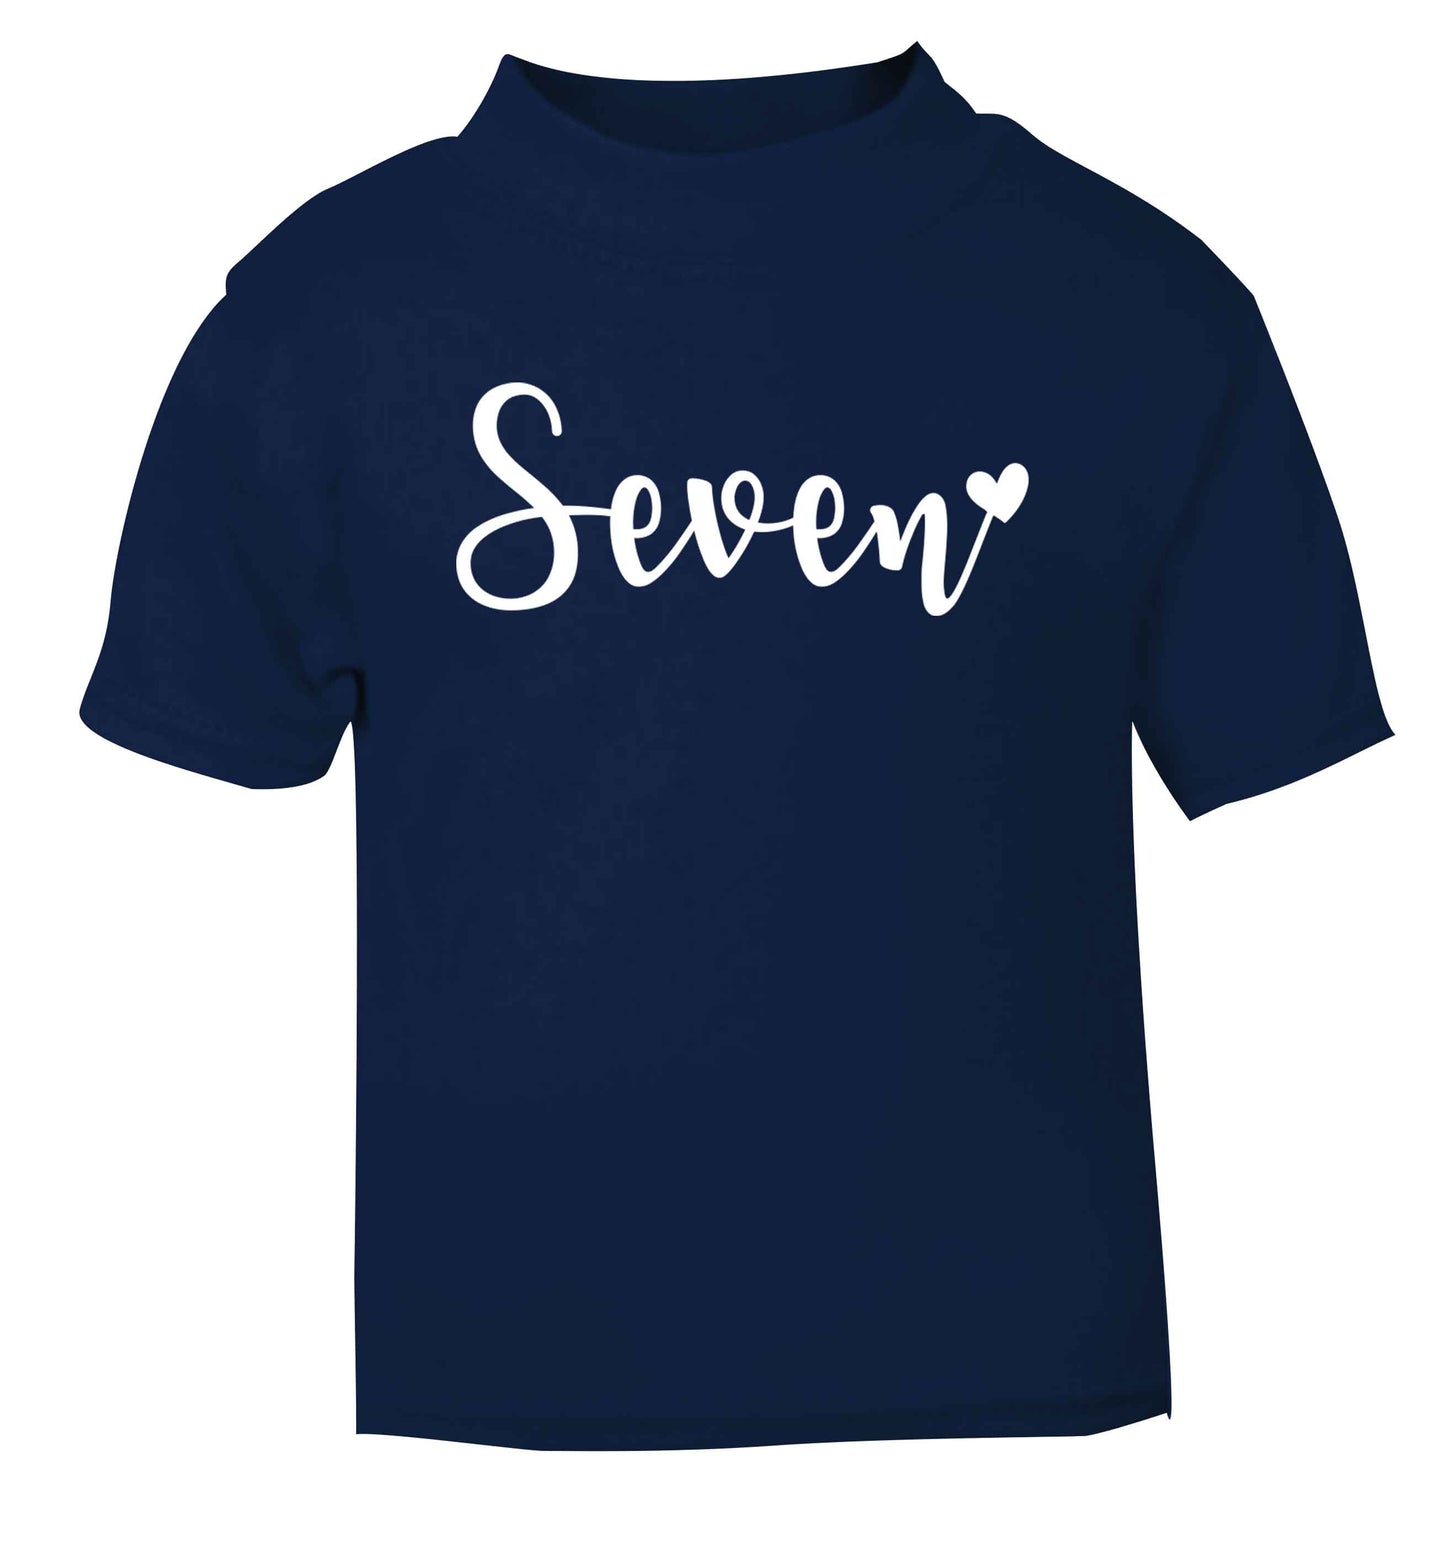 Seven and heart navy baby toddler Tshirt 2 Years